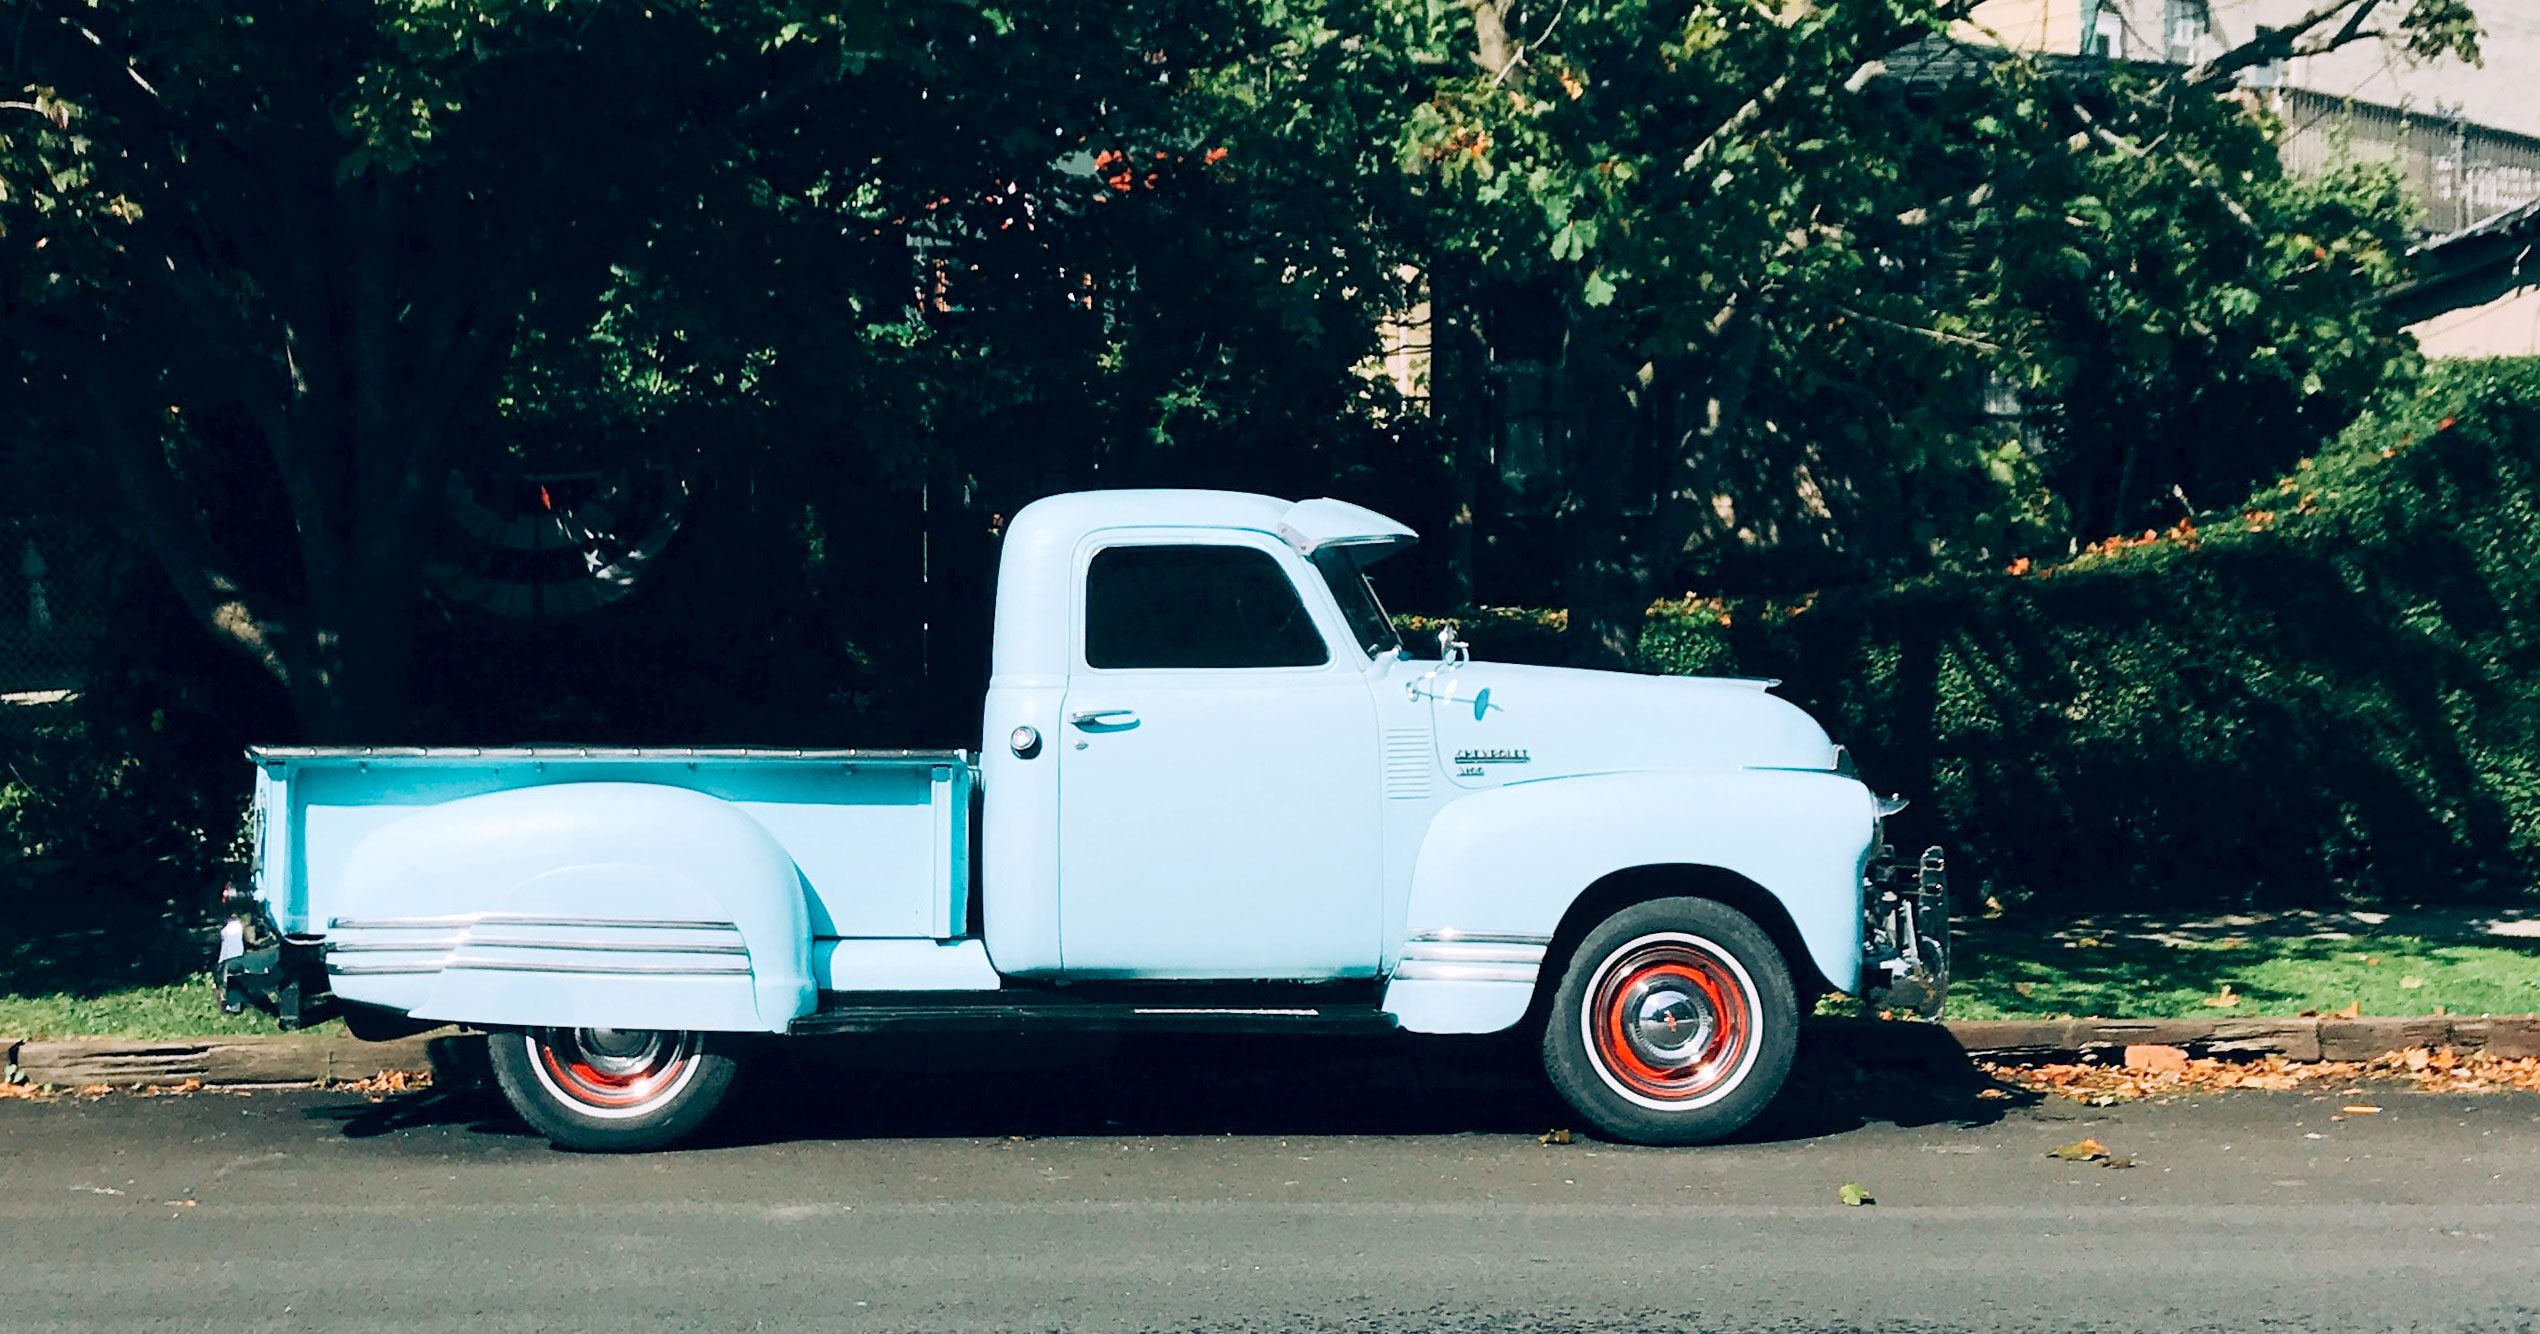 An old blue truck without power steering from The discipline of perception. Smart marketing strives to see things as "they" see them. Photo by Ben Cliff on Unsplash